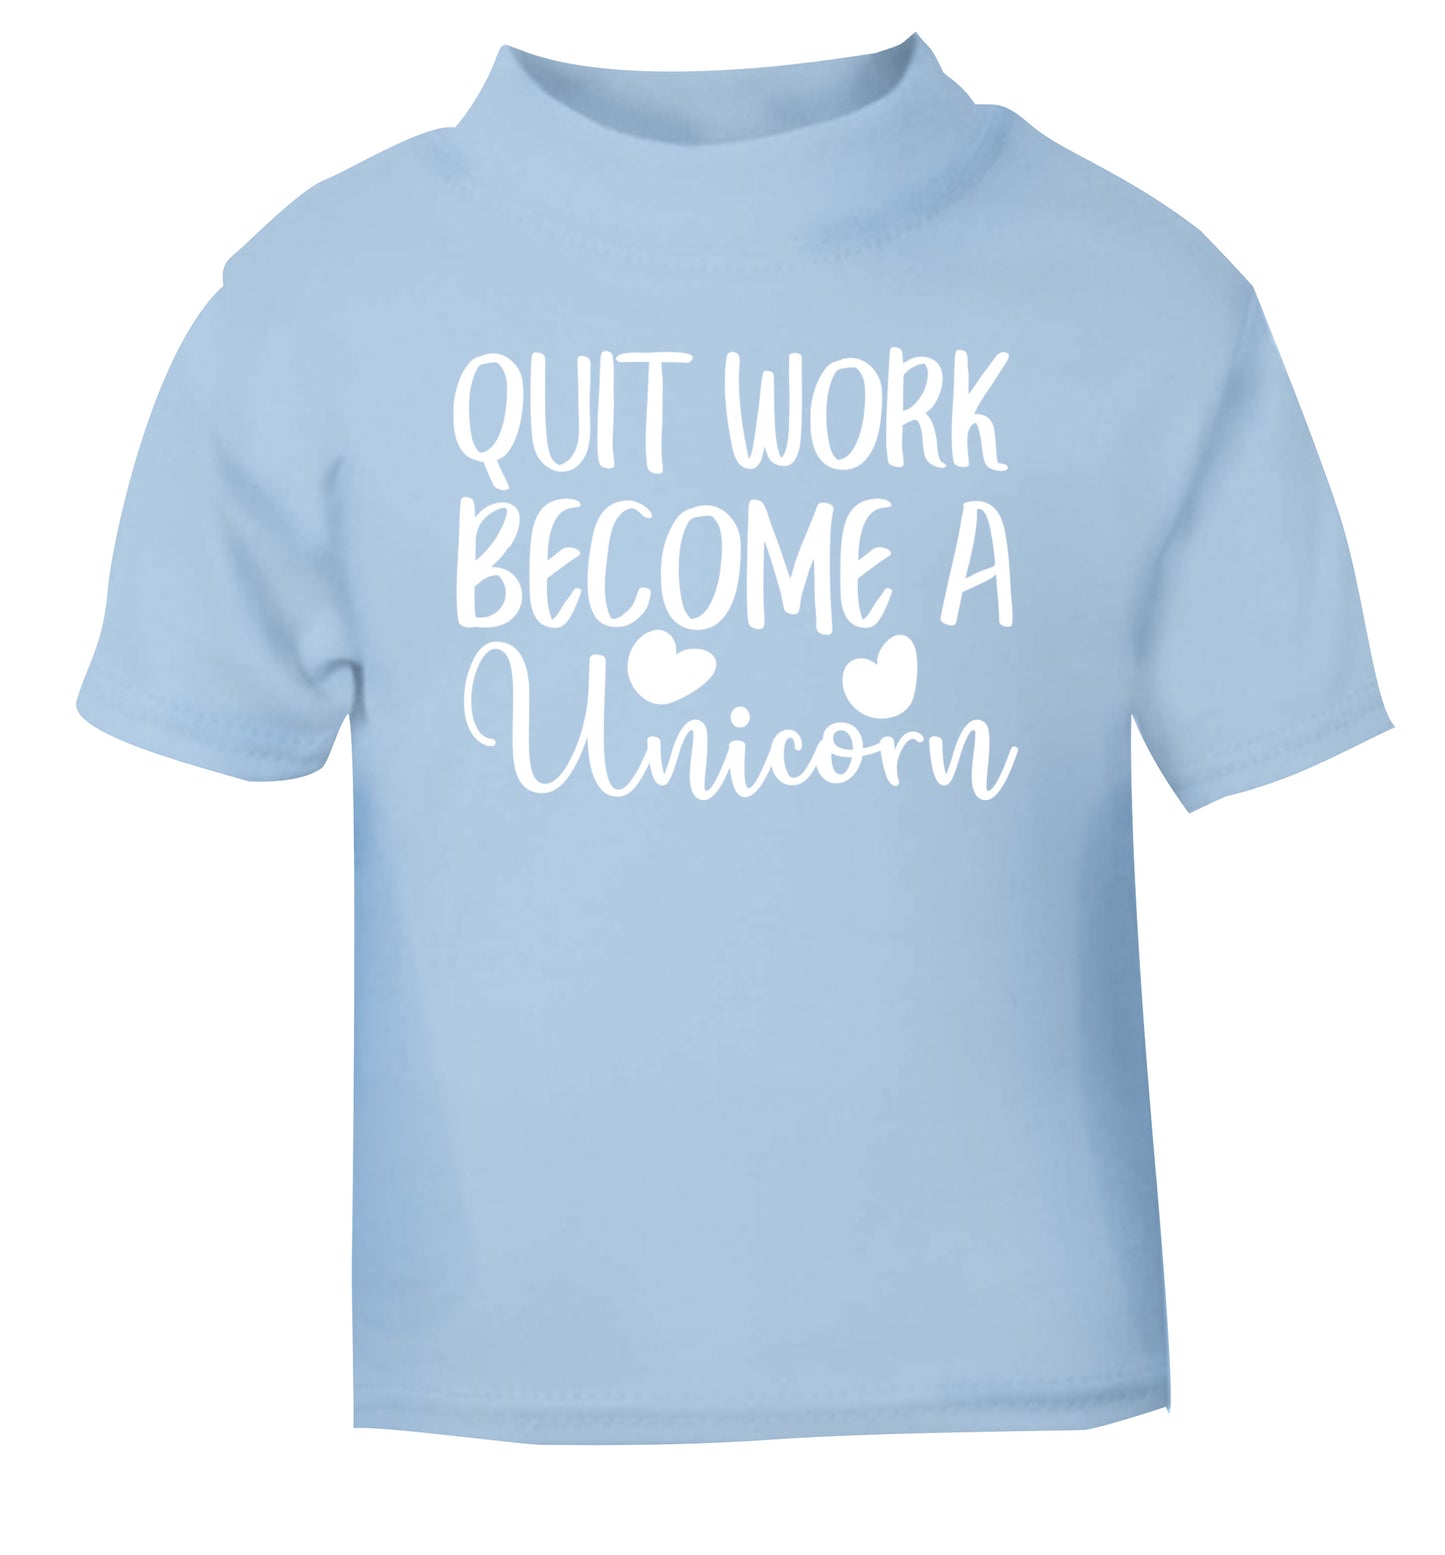 Quit work become a unicorn light blue Baby Toddler Tshirt 2 Years